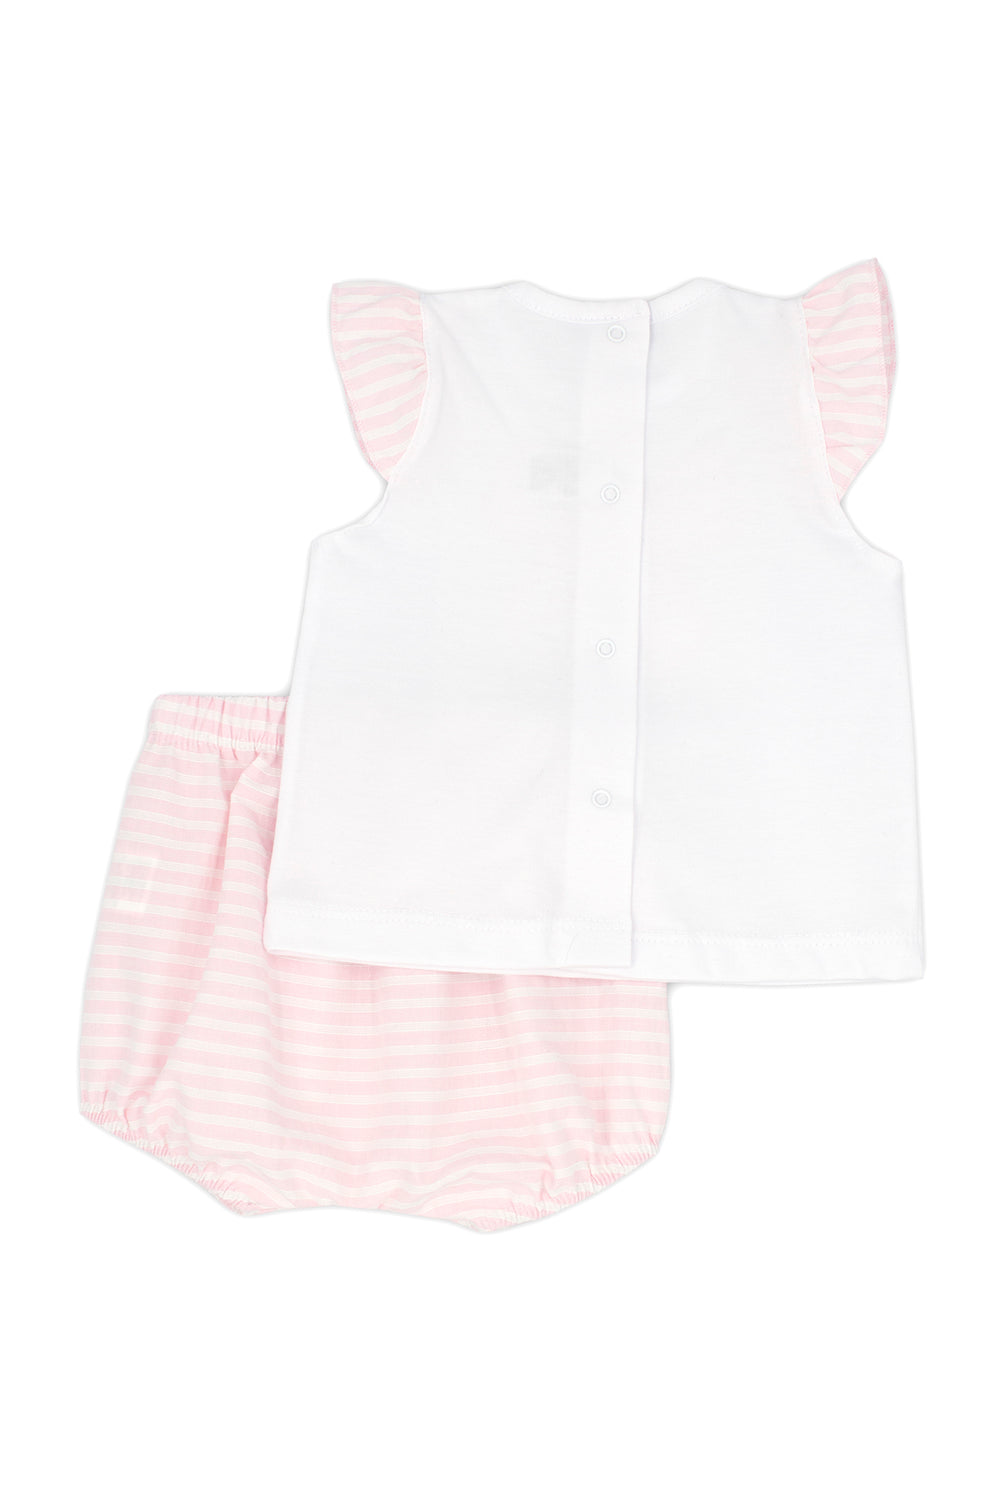 Rapife "Asteria" Pink Striped Top & Bloomers | Millie and John